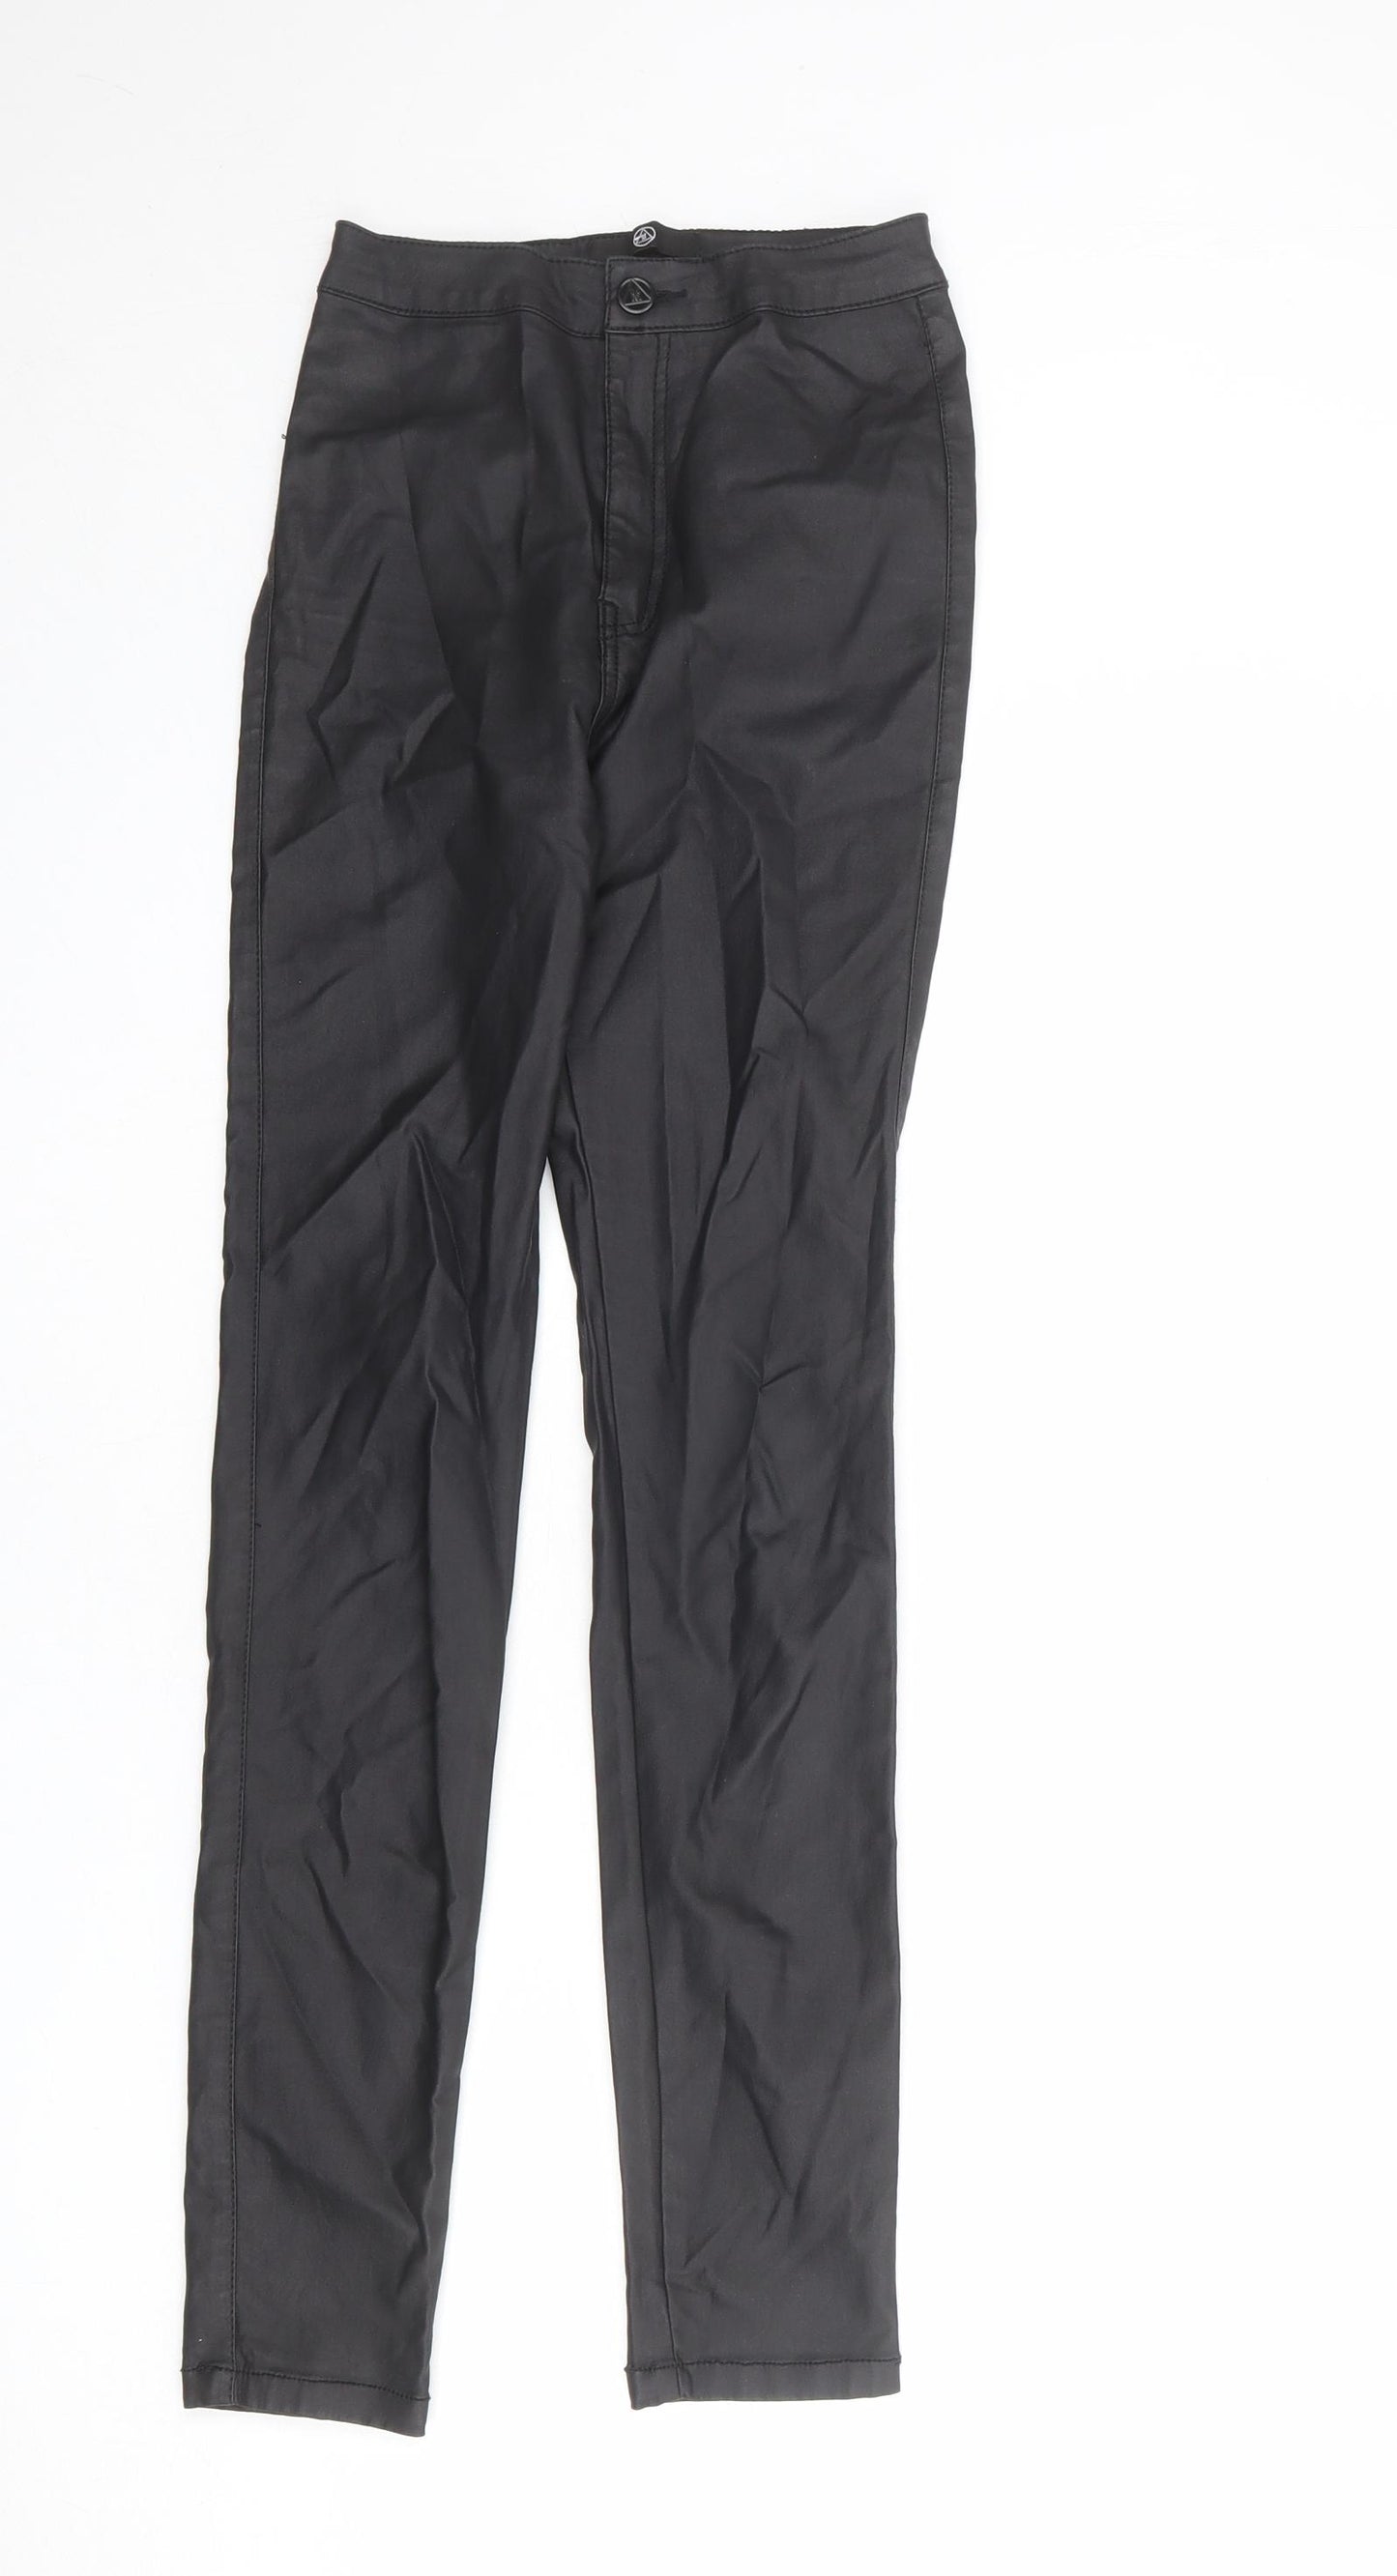 Missguided Womens Black Viscose Trousers Size 8 L27 in Regular Zip